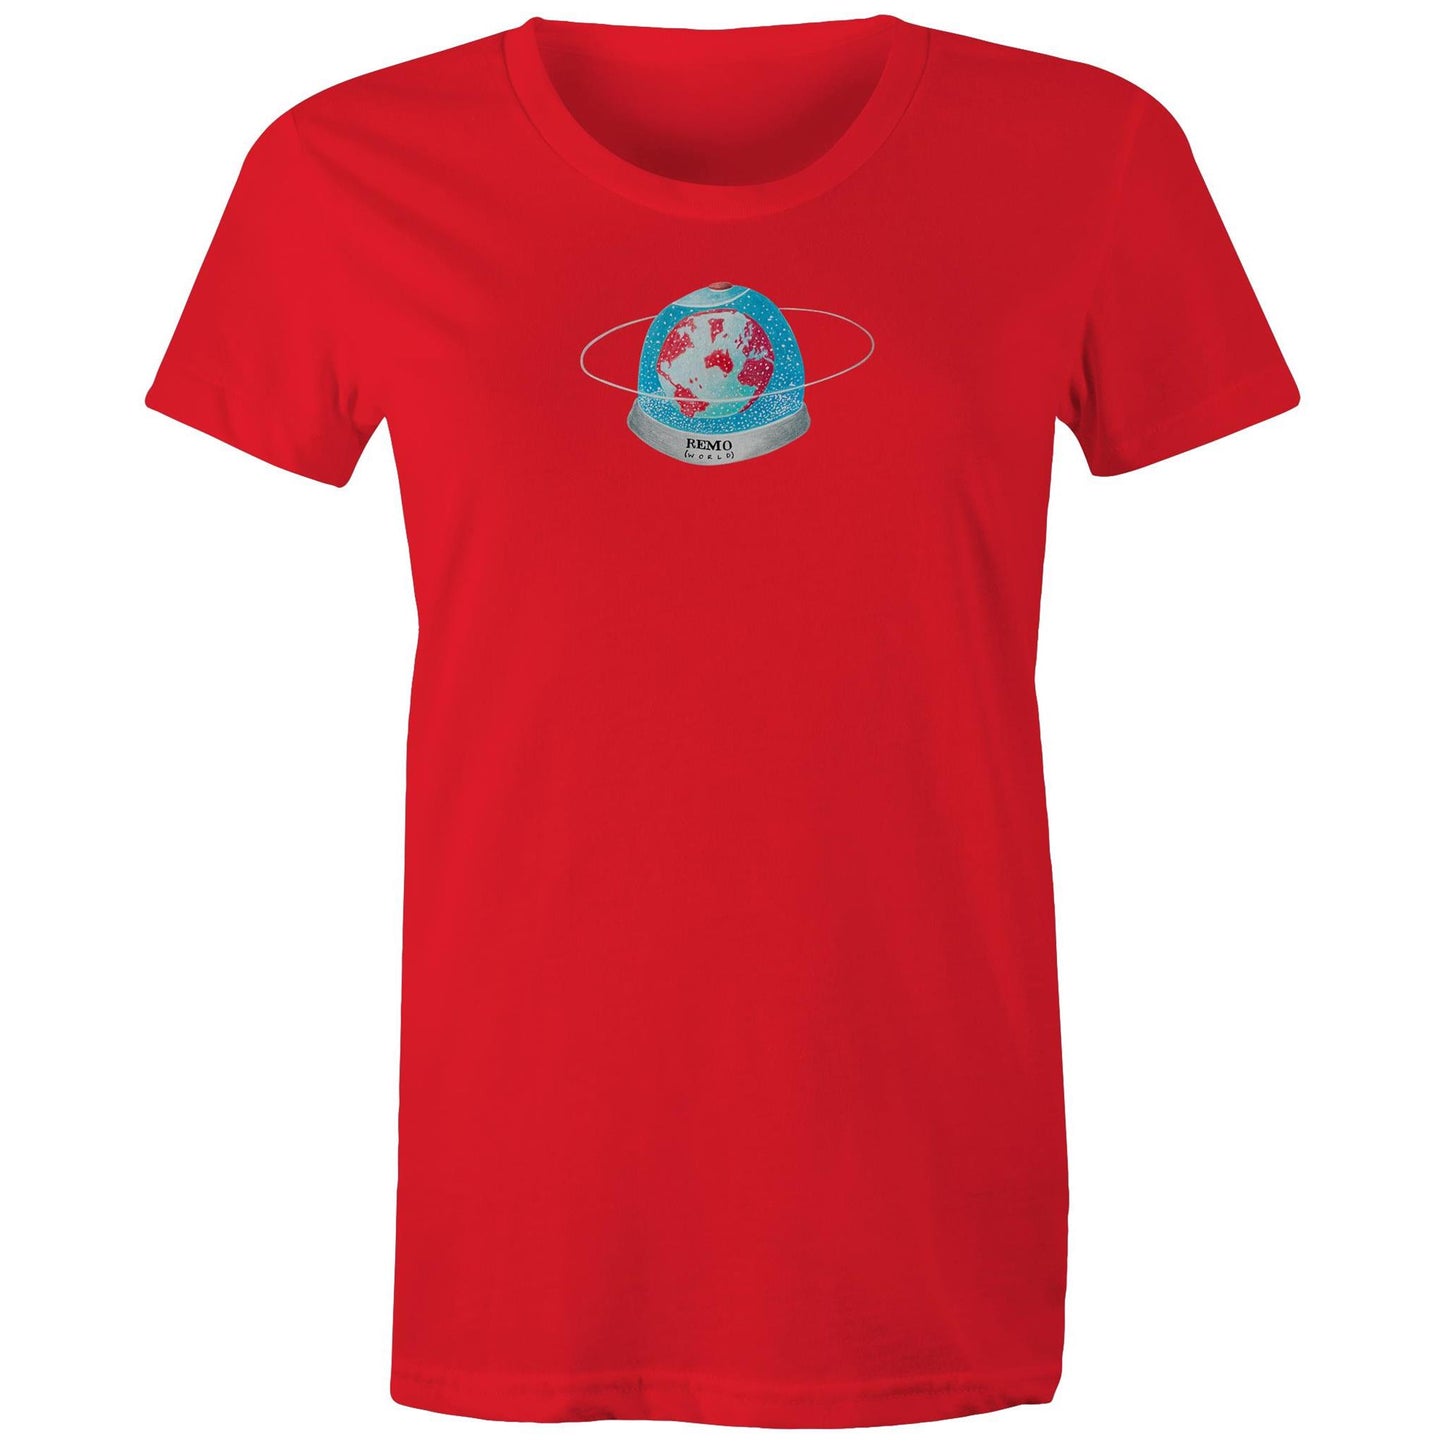 REMO World T Shirts for Women